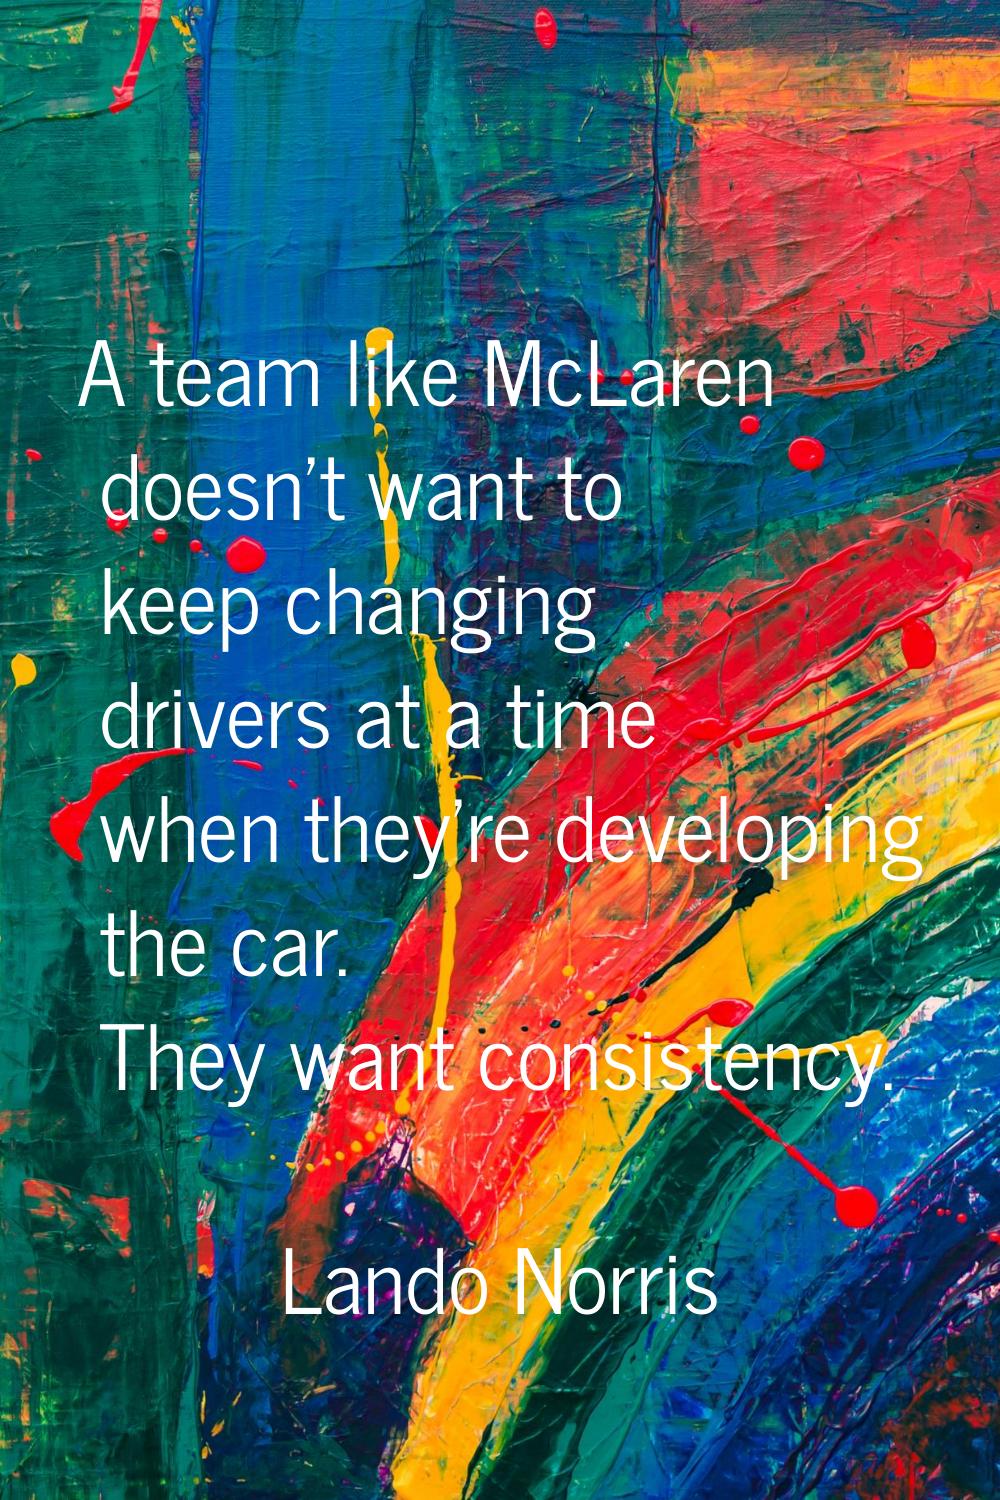 A team like McLaren doesn't want to keep changing drivers at a time when they're developing the car